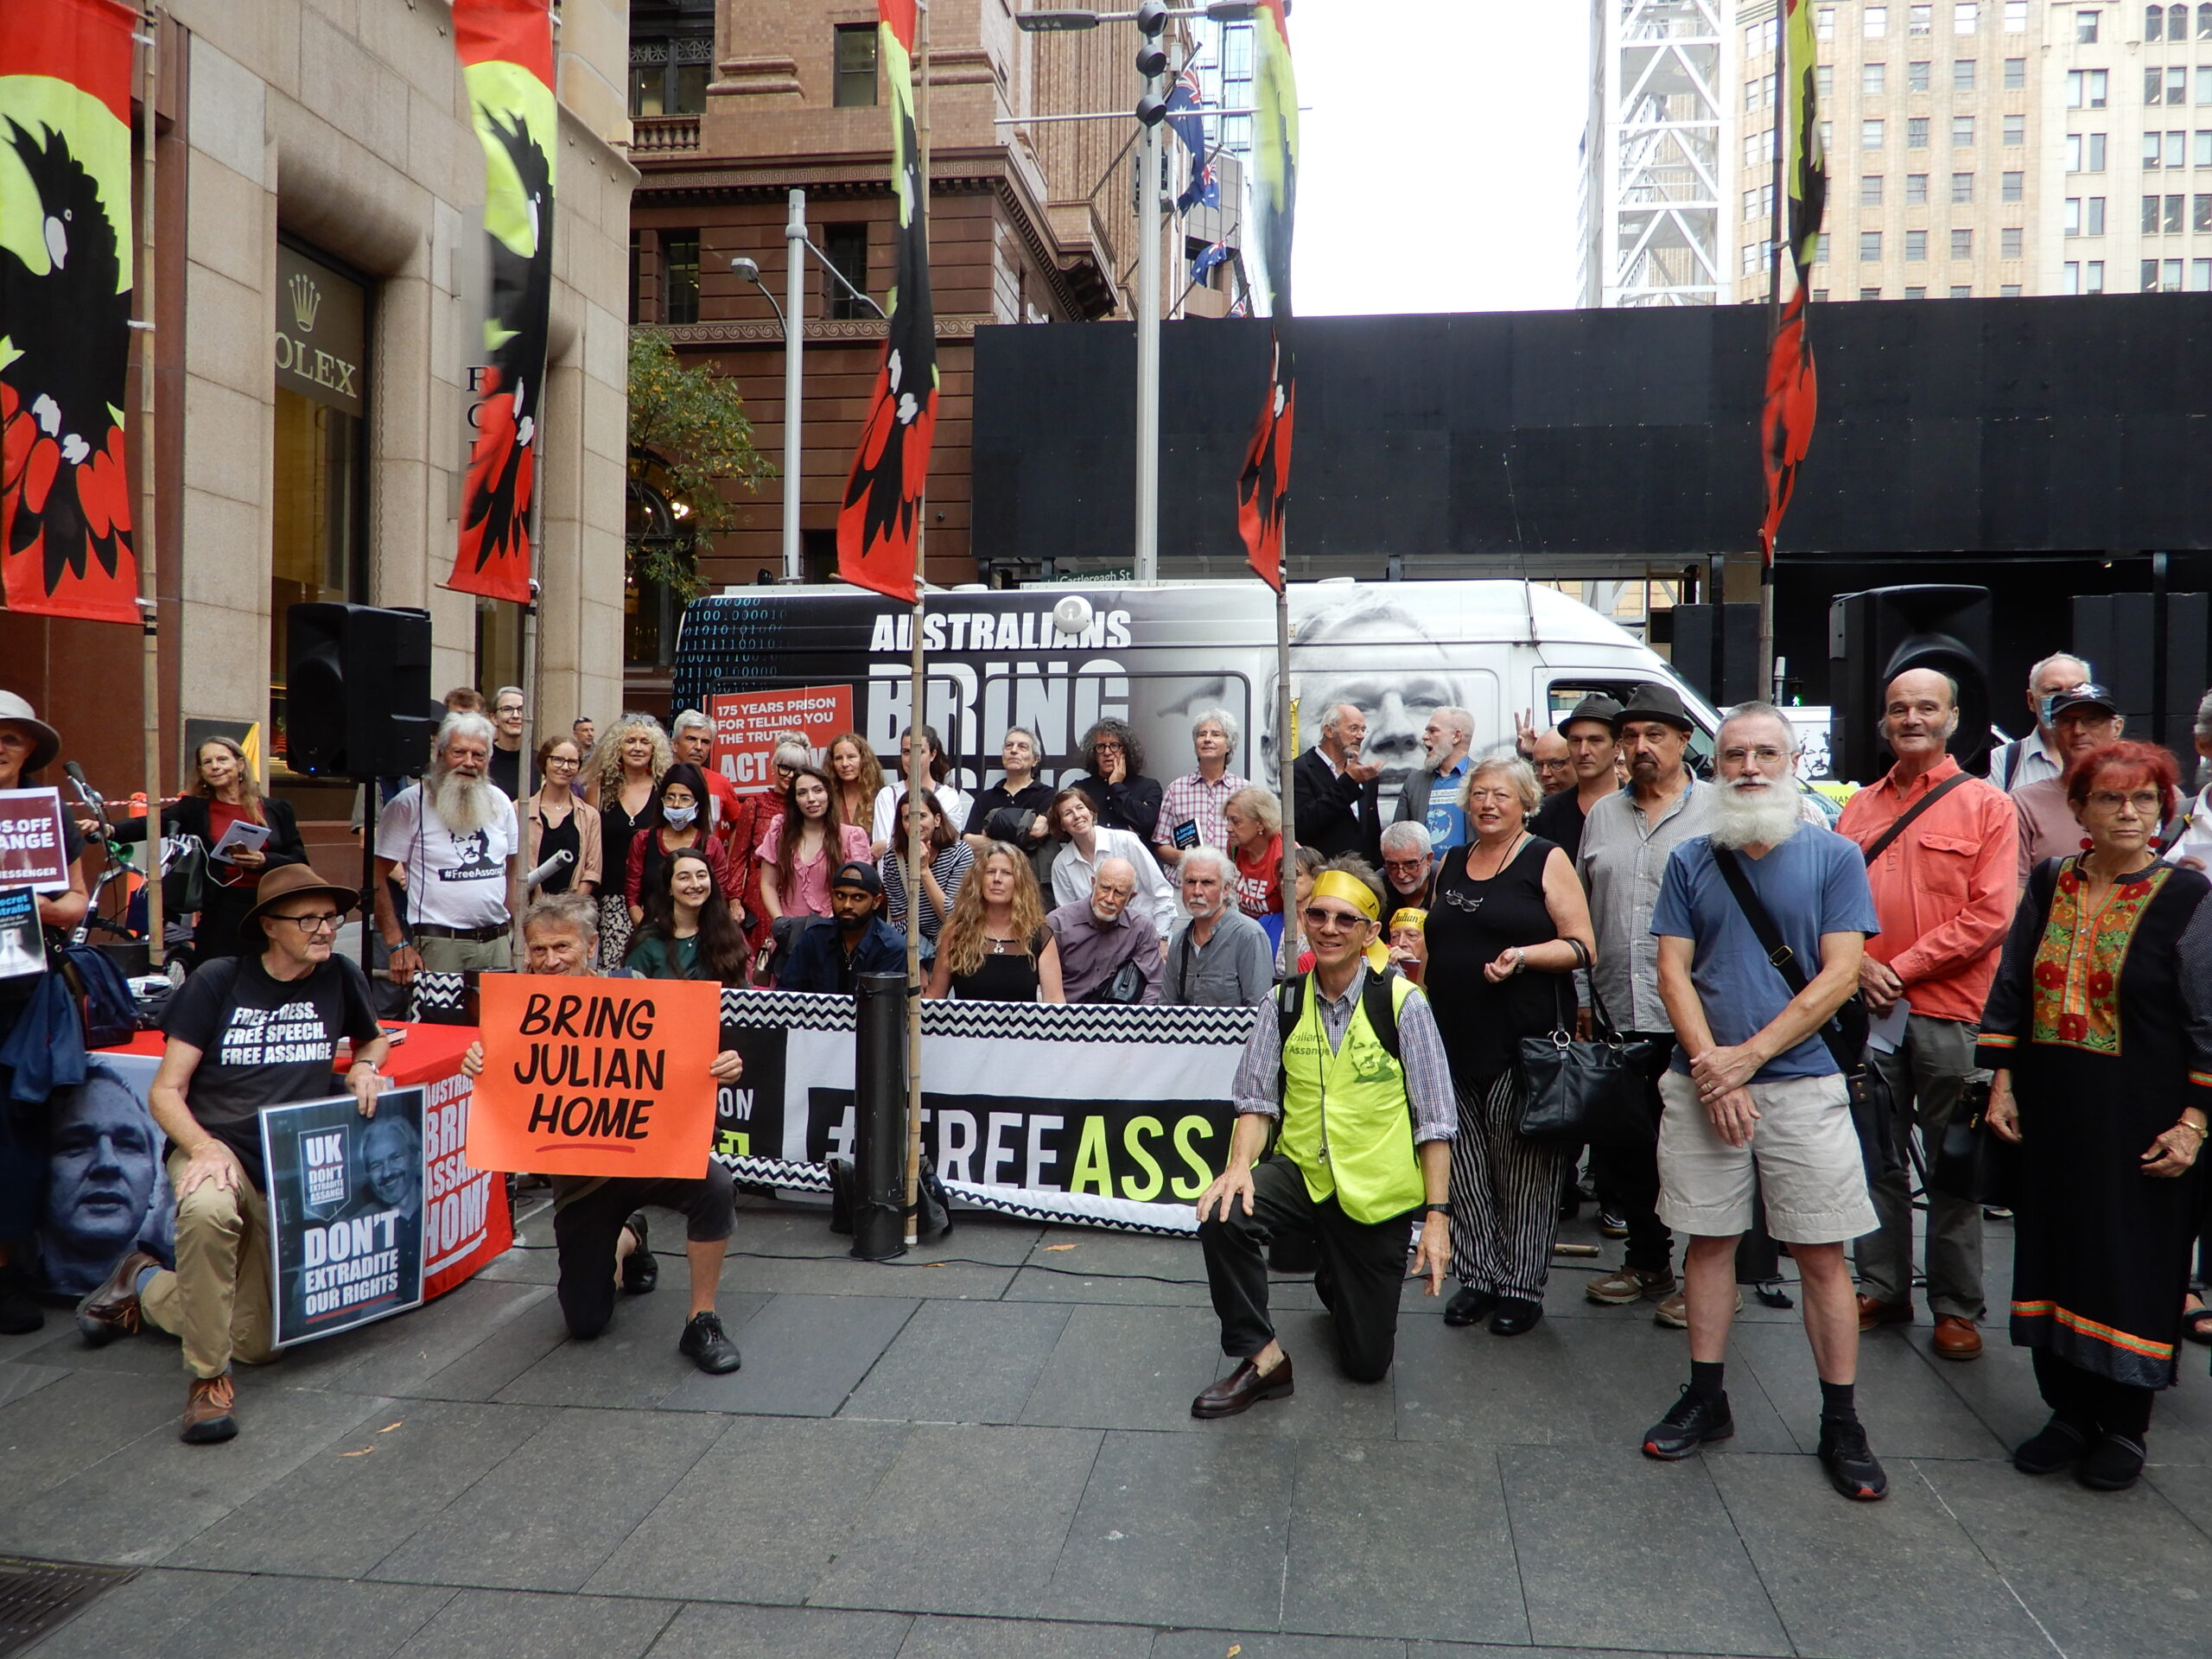 Supporters in Martin Place call for Assange’s release